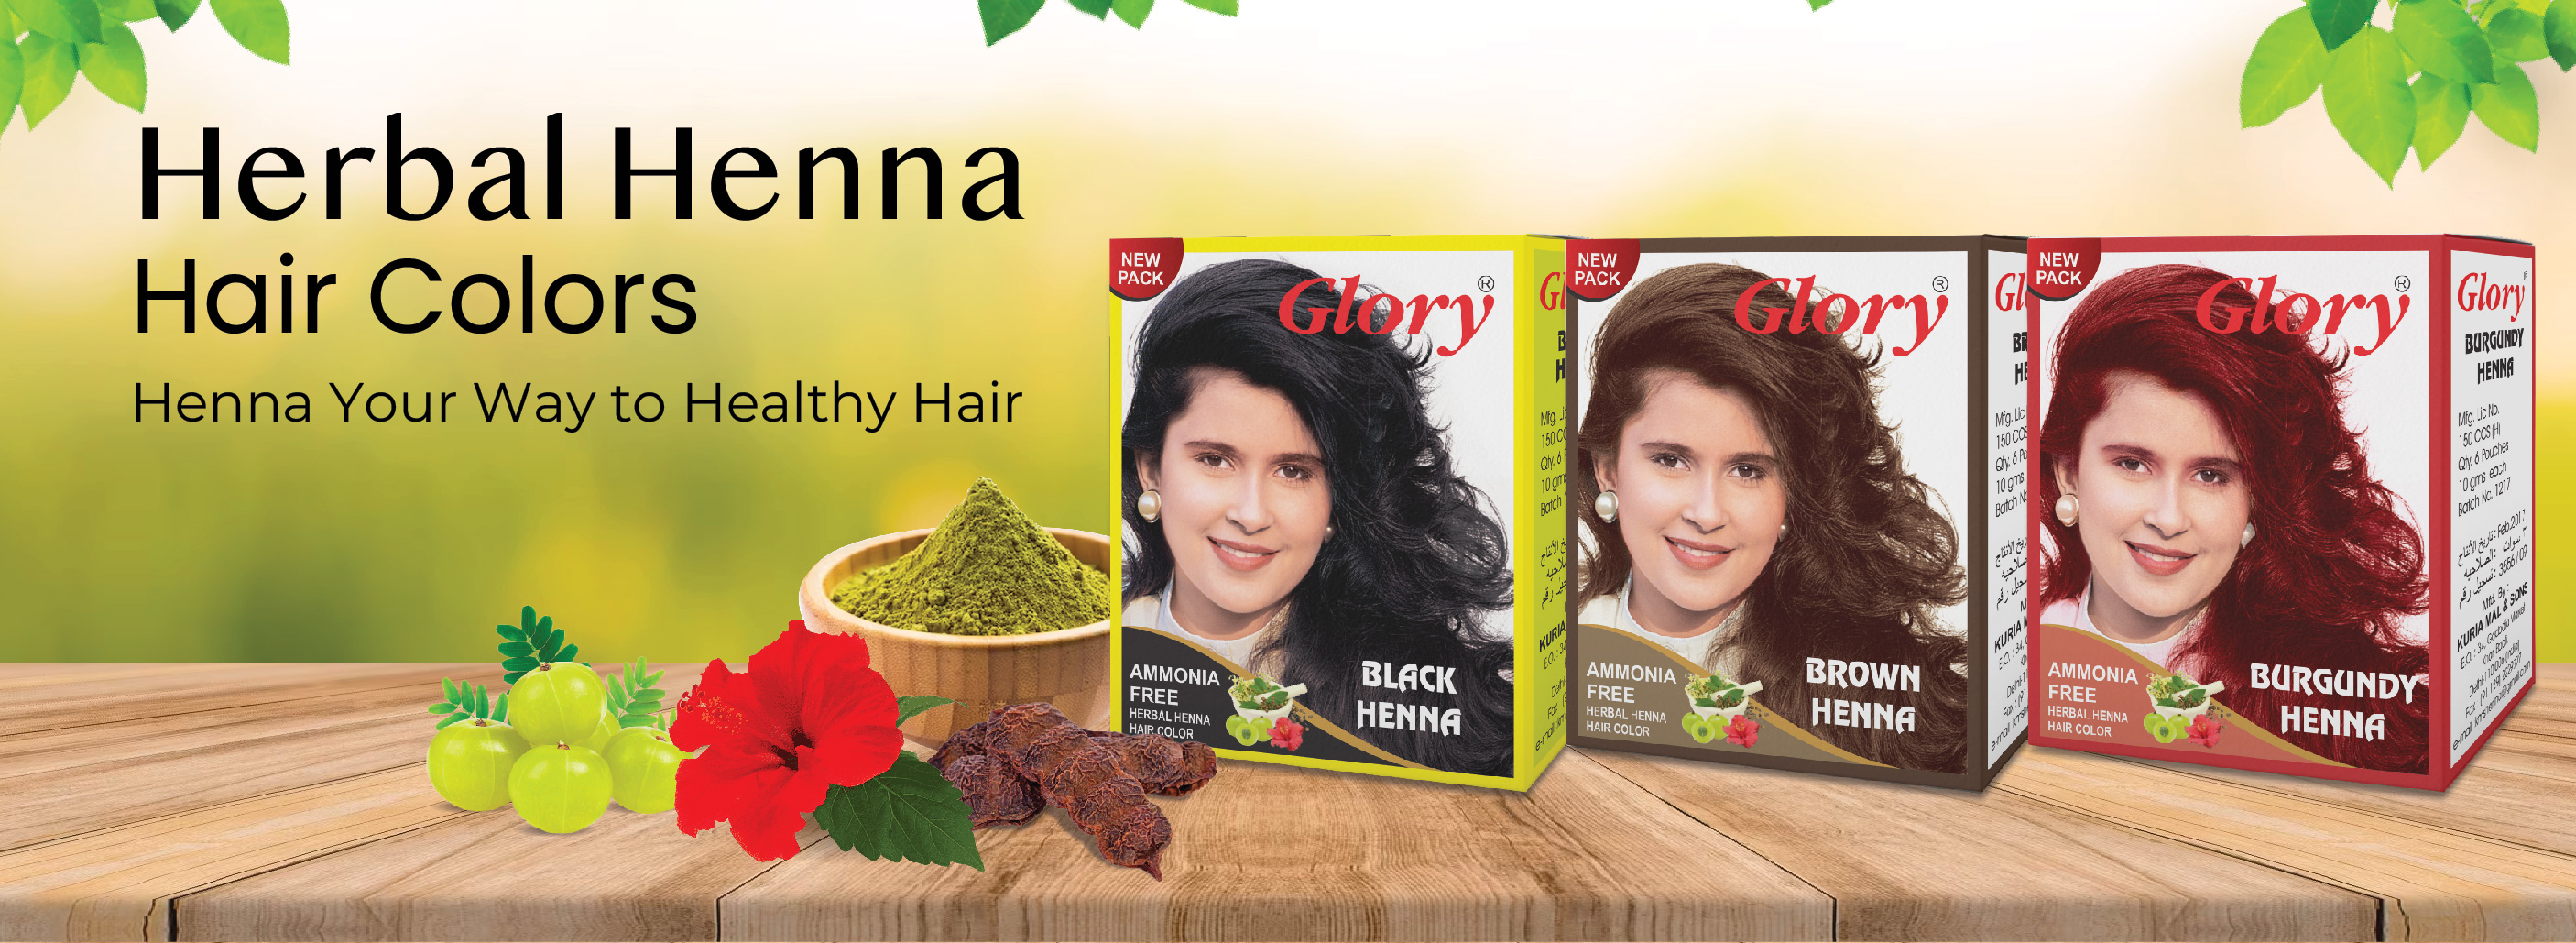 Henna Hair Color Manufacturer | Henna Hair Color Manufacturer in Philippines